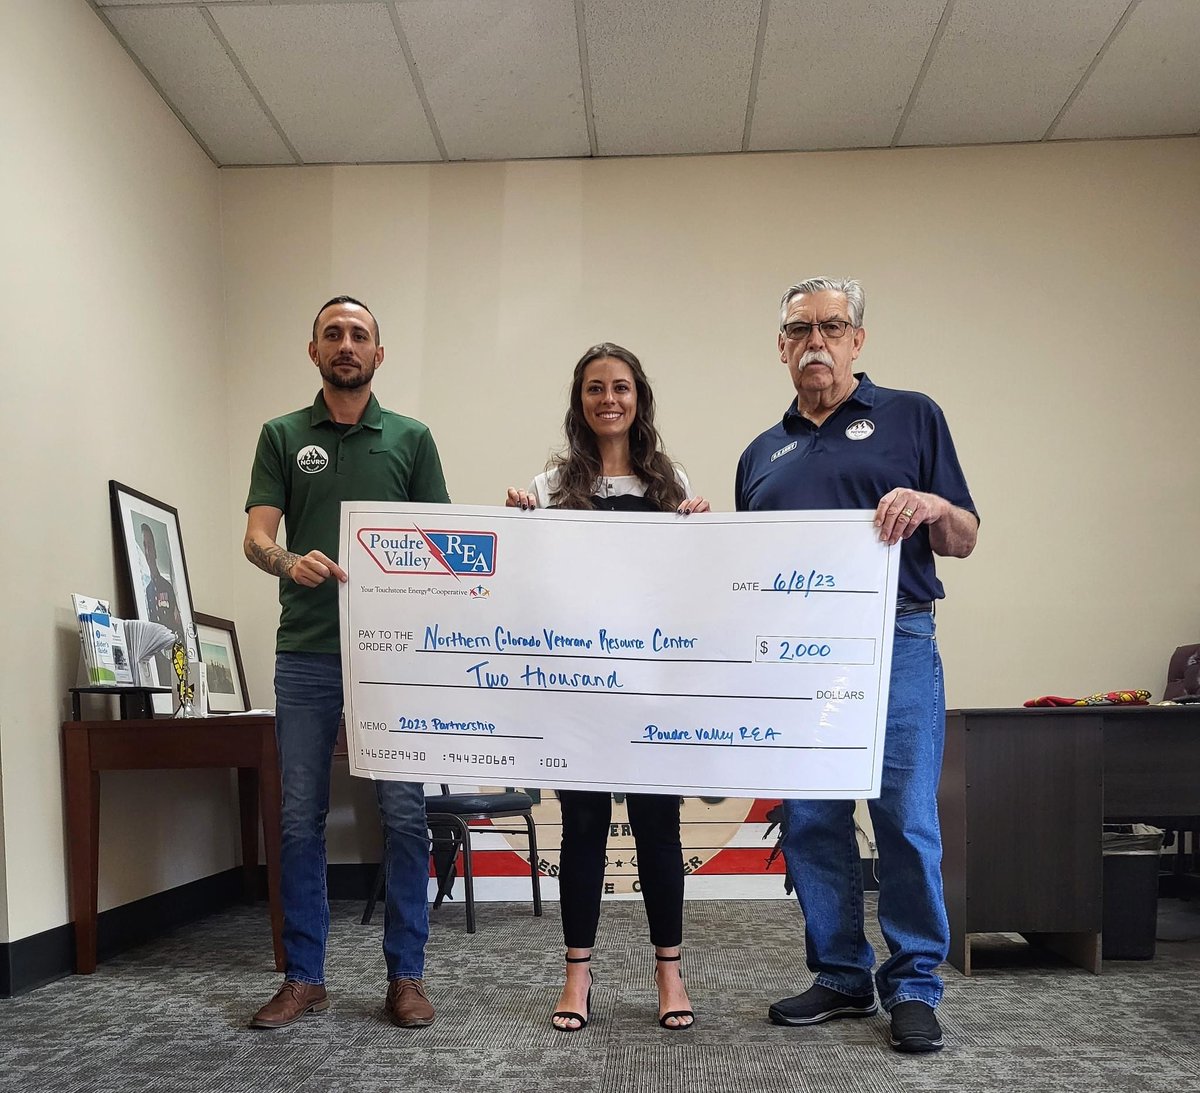 Thank you @Poudre Valley REA for continuing to support our mission and the Veteran community. We could not provide the services we do if it weren't for companies like yours. Thank you! 
#PVREA #Veterans #NCVRC  #VeteransHelpingVeterans